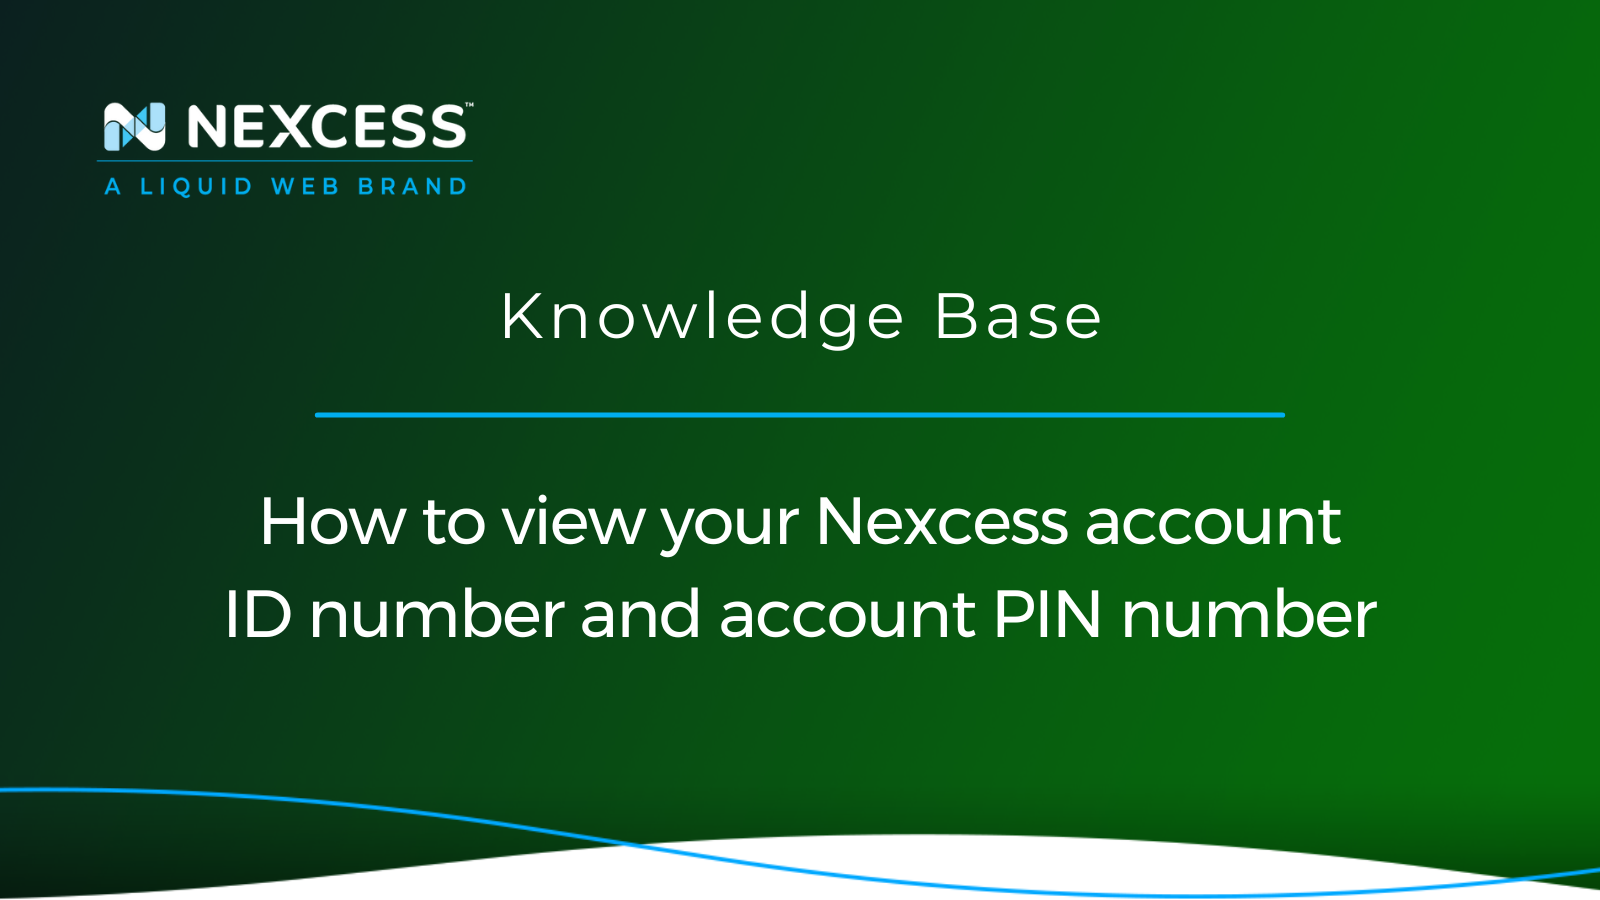 How to view your Nexcess account ID number and account PIN number